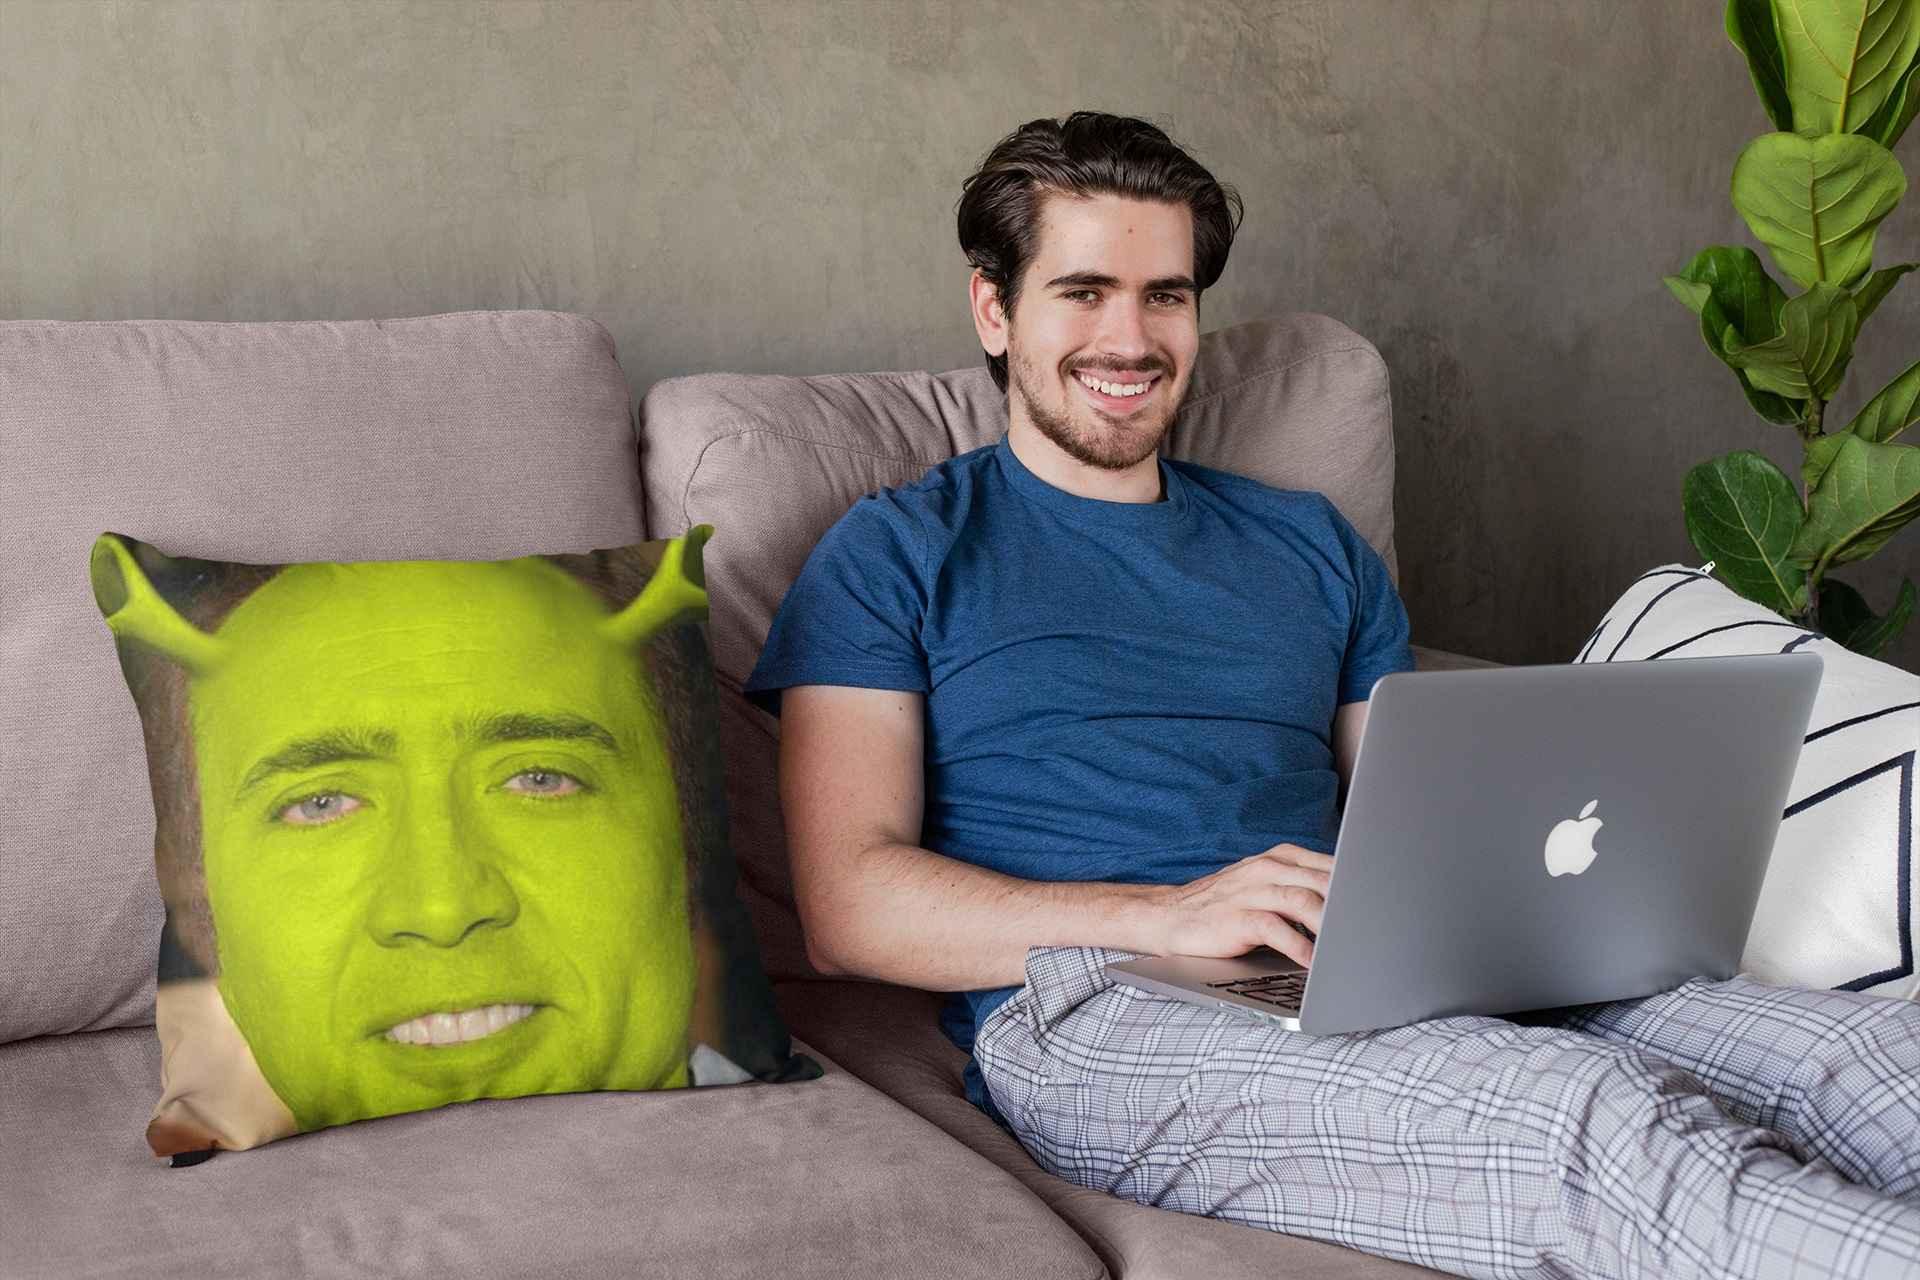 A smiling young man with a laptop sitting next to a Nicolas Cage Shrek pillow.